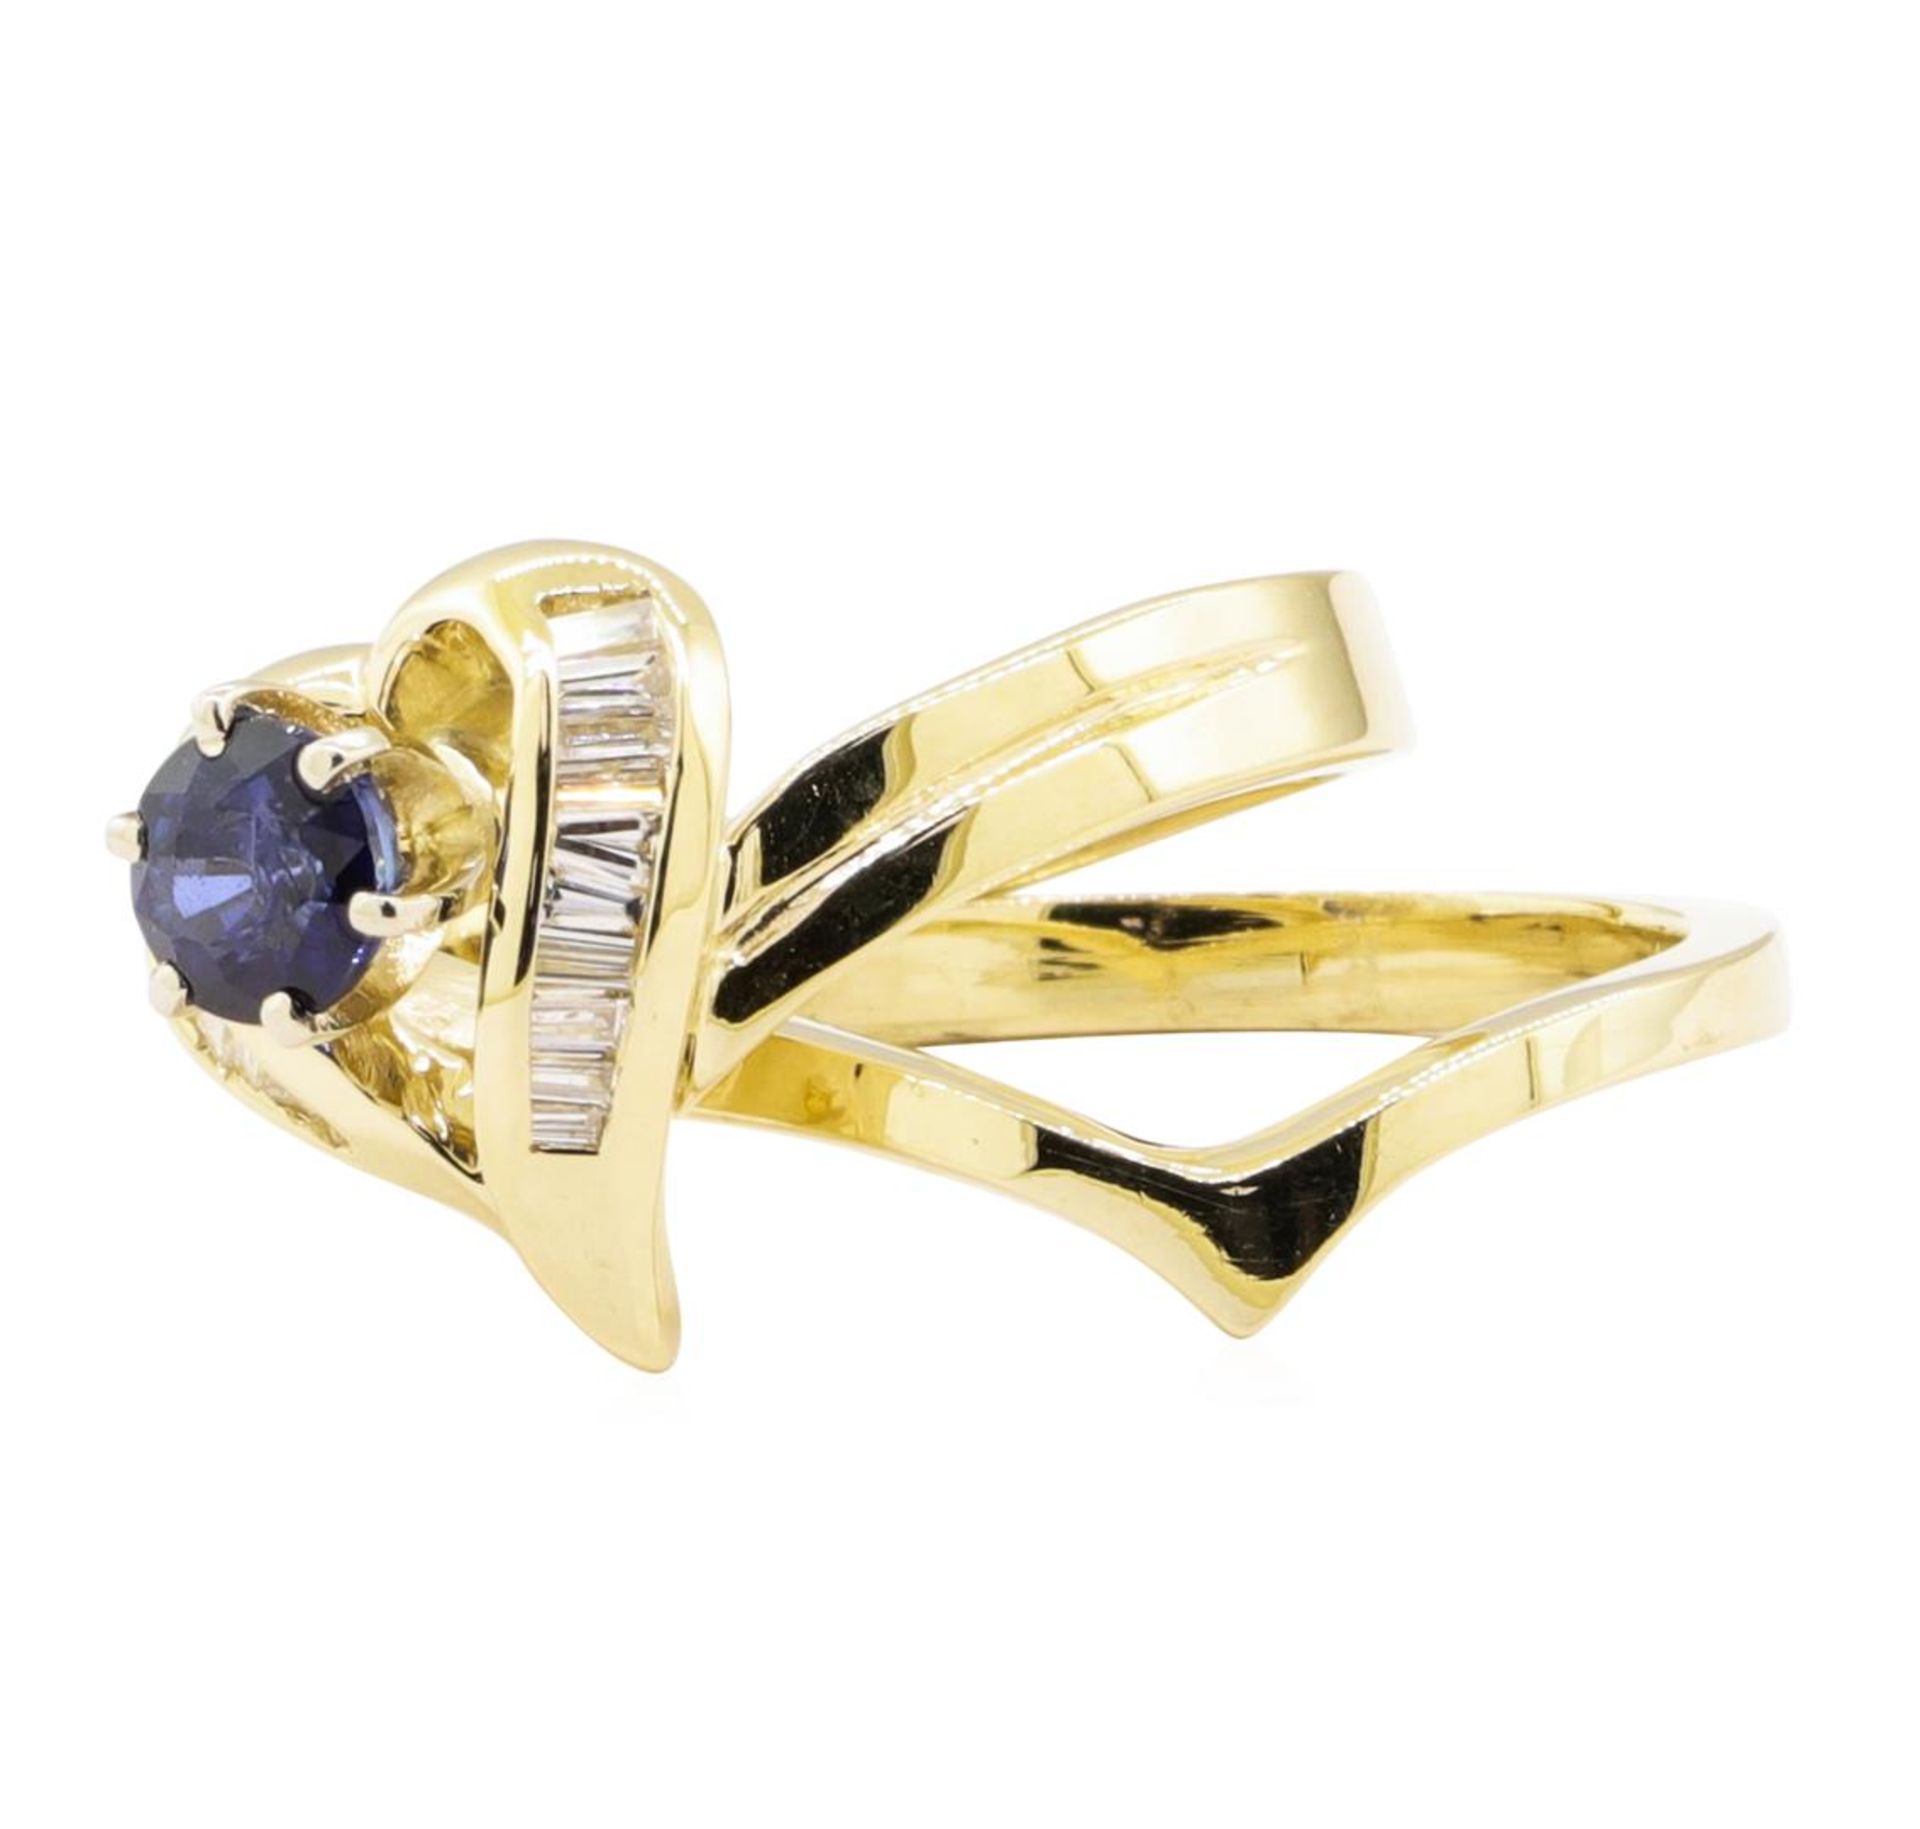 0.92 ctw Blue Sapphire And Diamond Ring And Band - 14KT Yellow Gold - Image 3 of 4